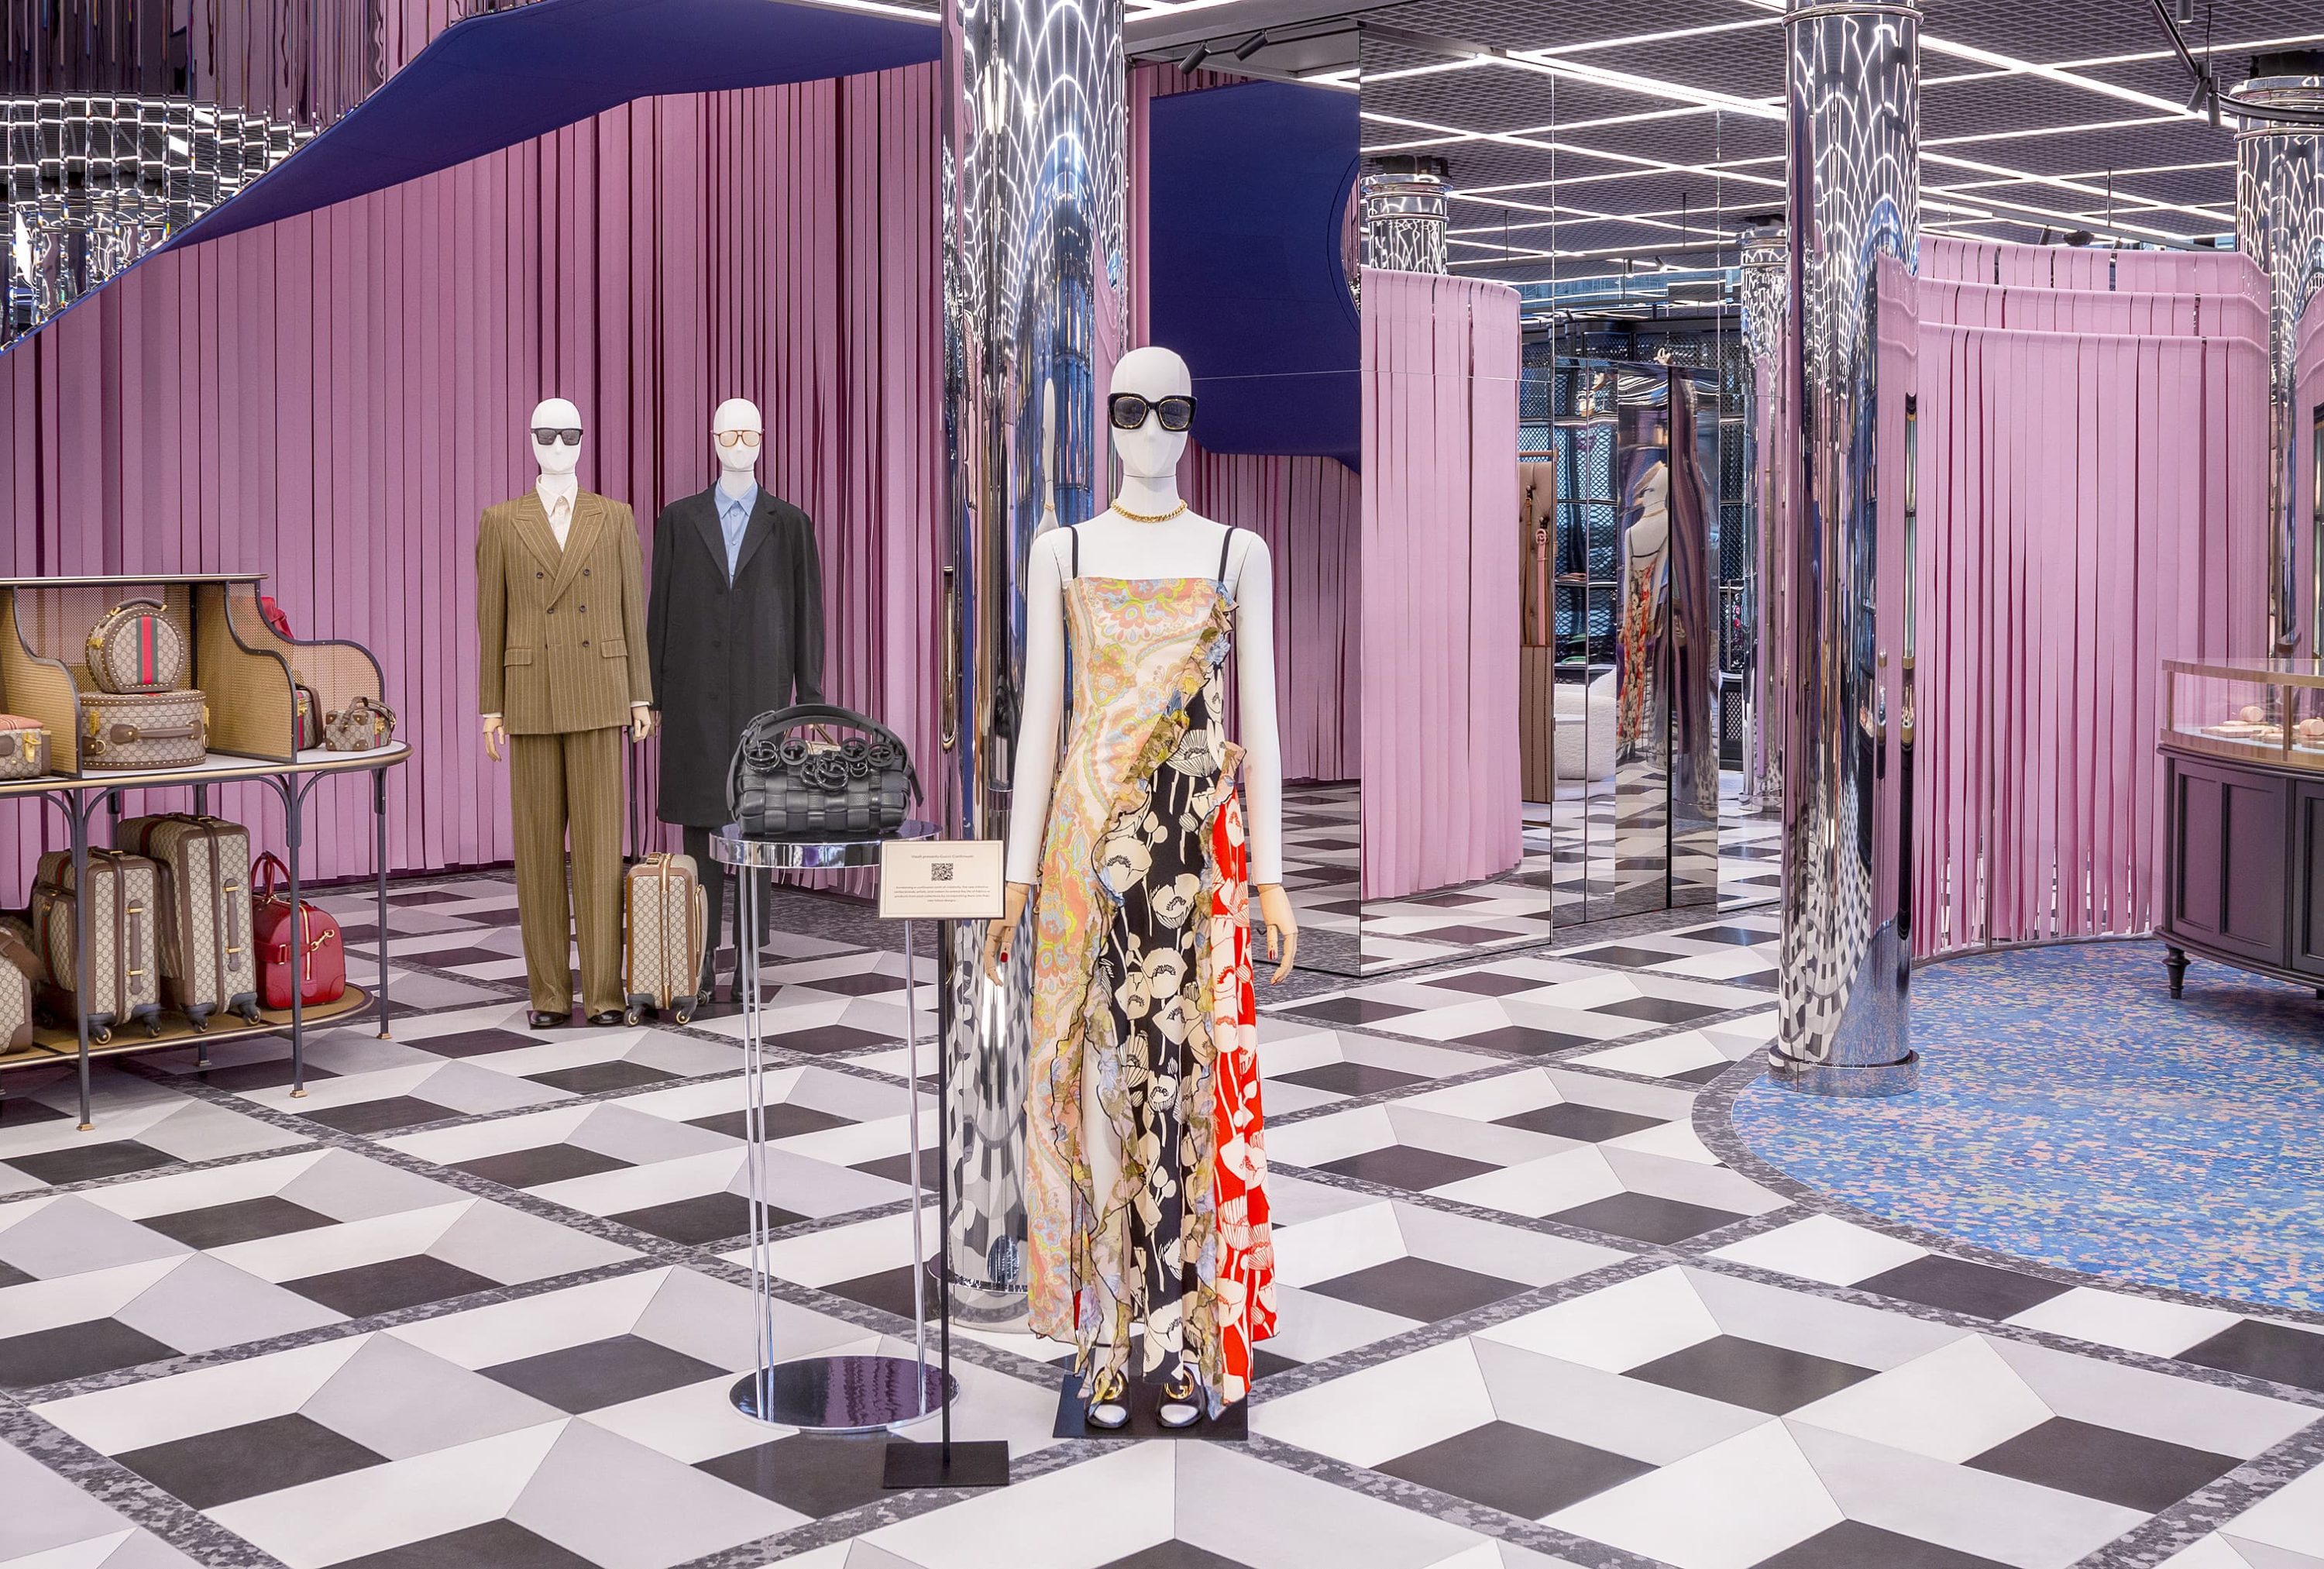 First look at Gucci's newest sustainable store in New York's